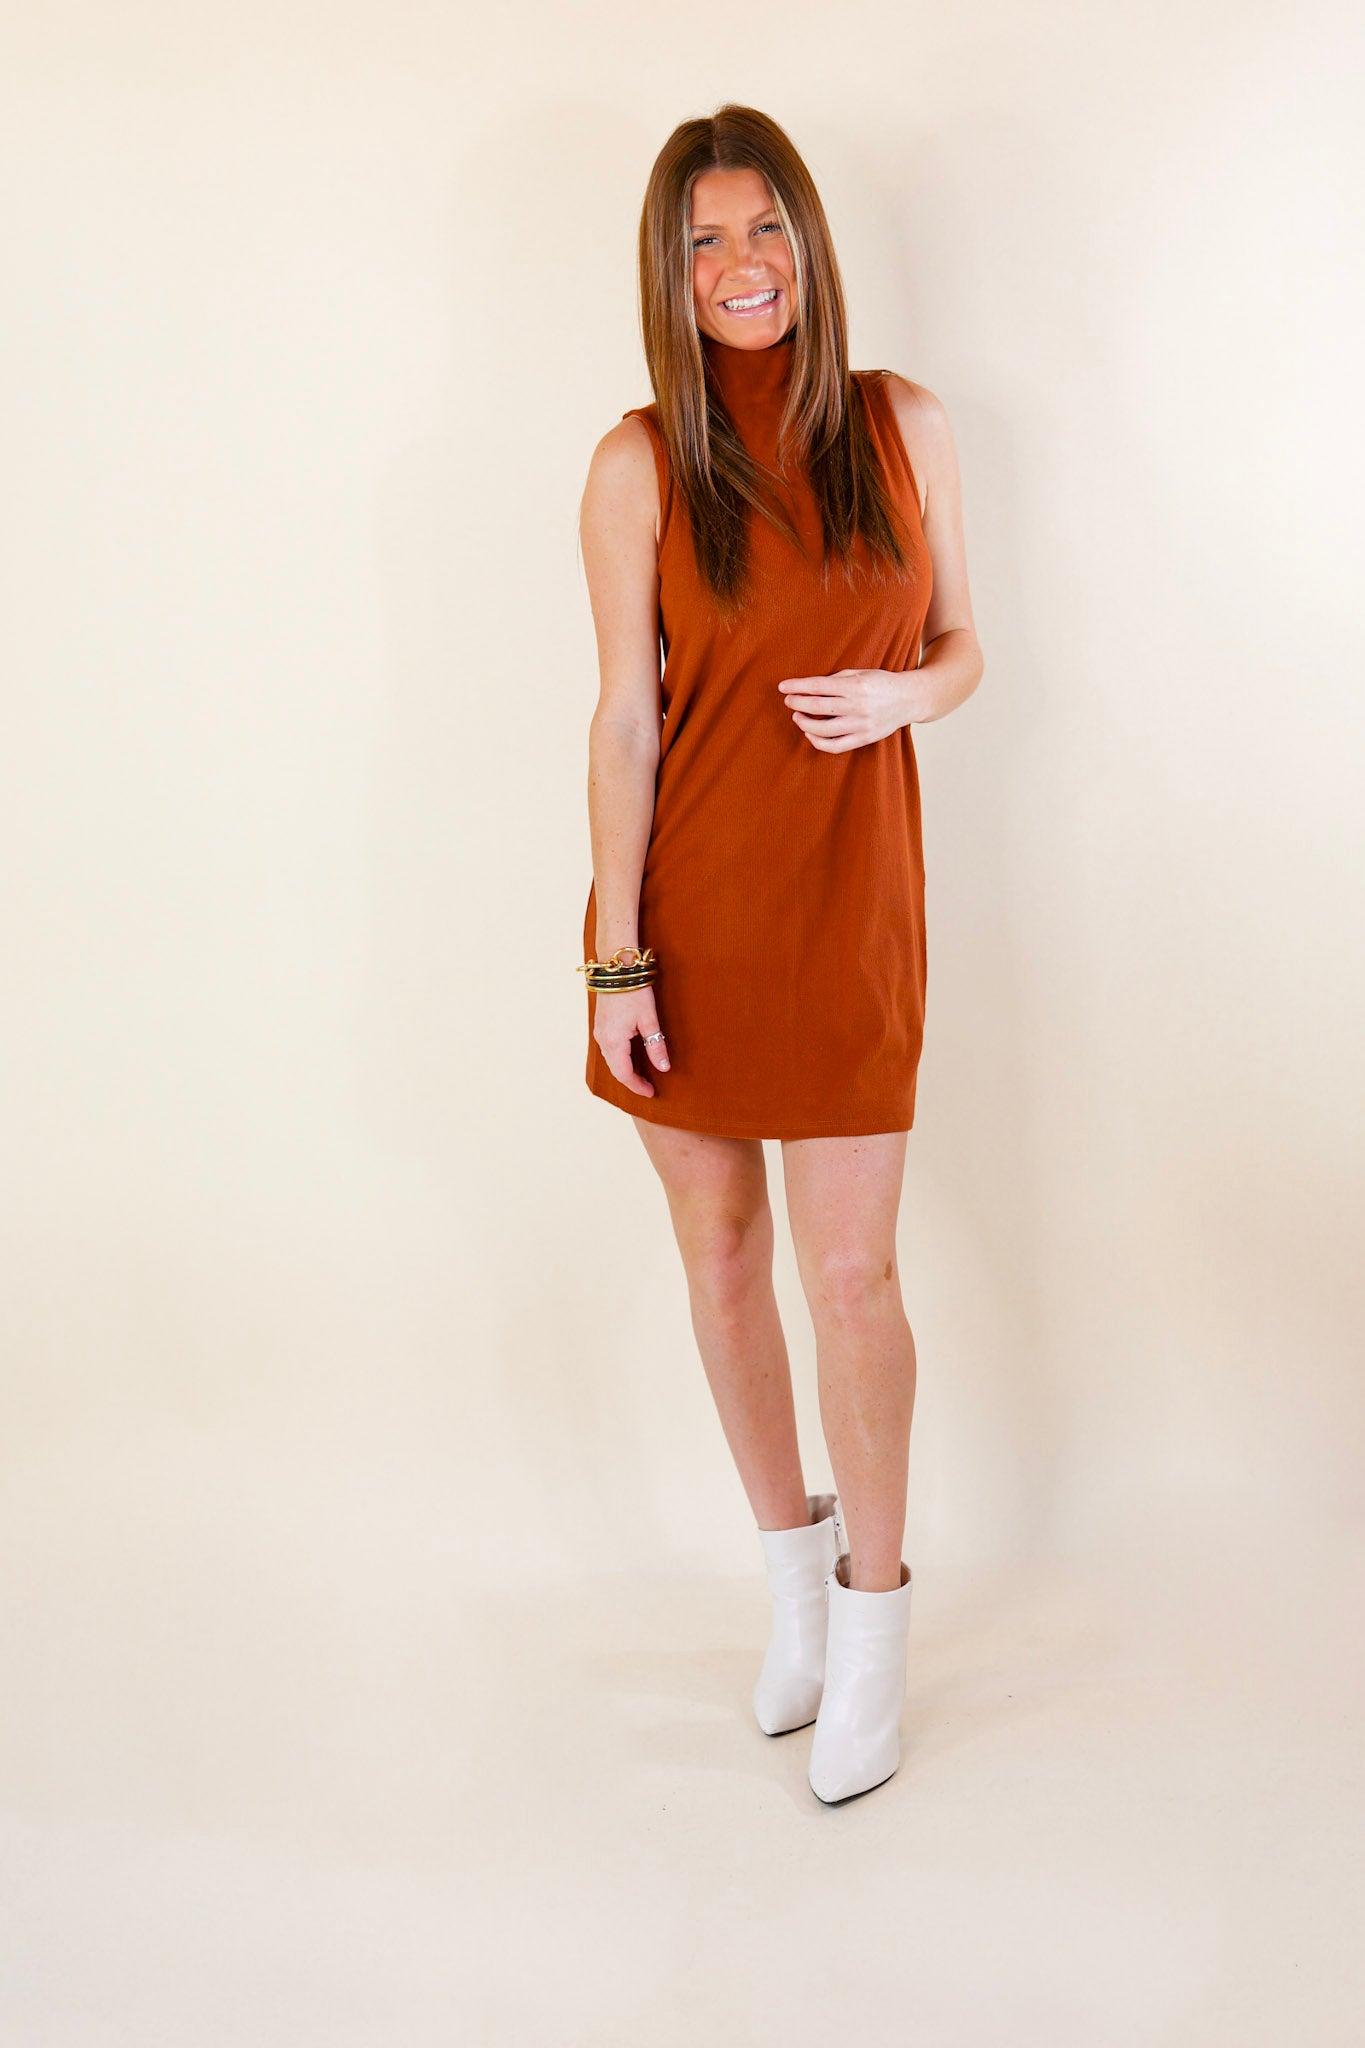 One Love Tank Sweater Dress with Turtle Neck in Rust Orange - Giddy Up Glamour Boutique